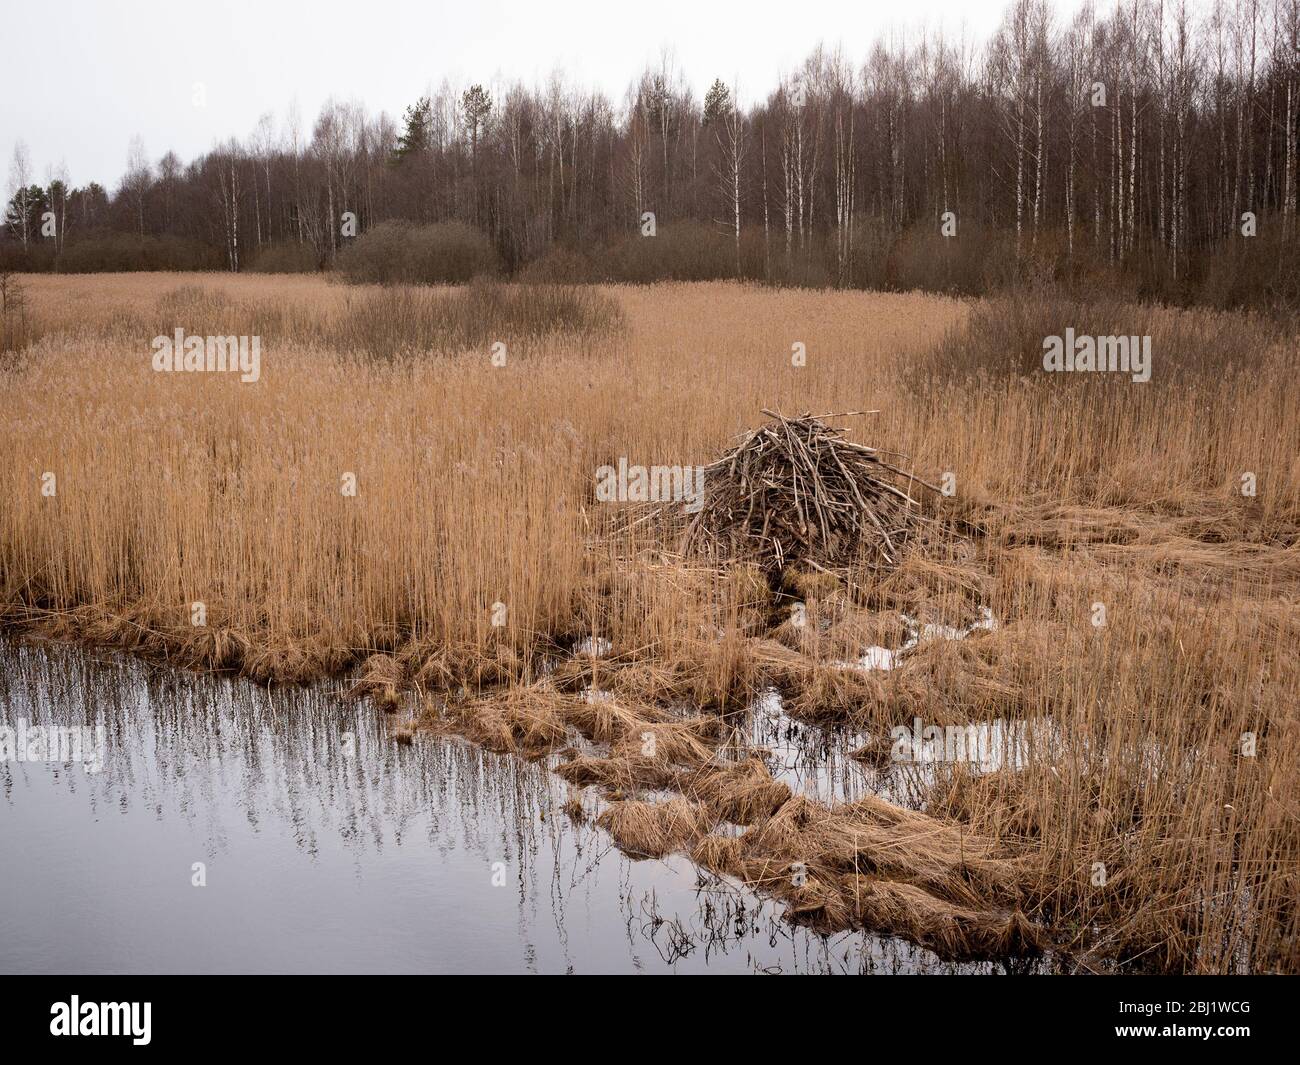 Spring landscape with beaver lodge among dry grass stems amid trees Stock Photo